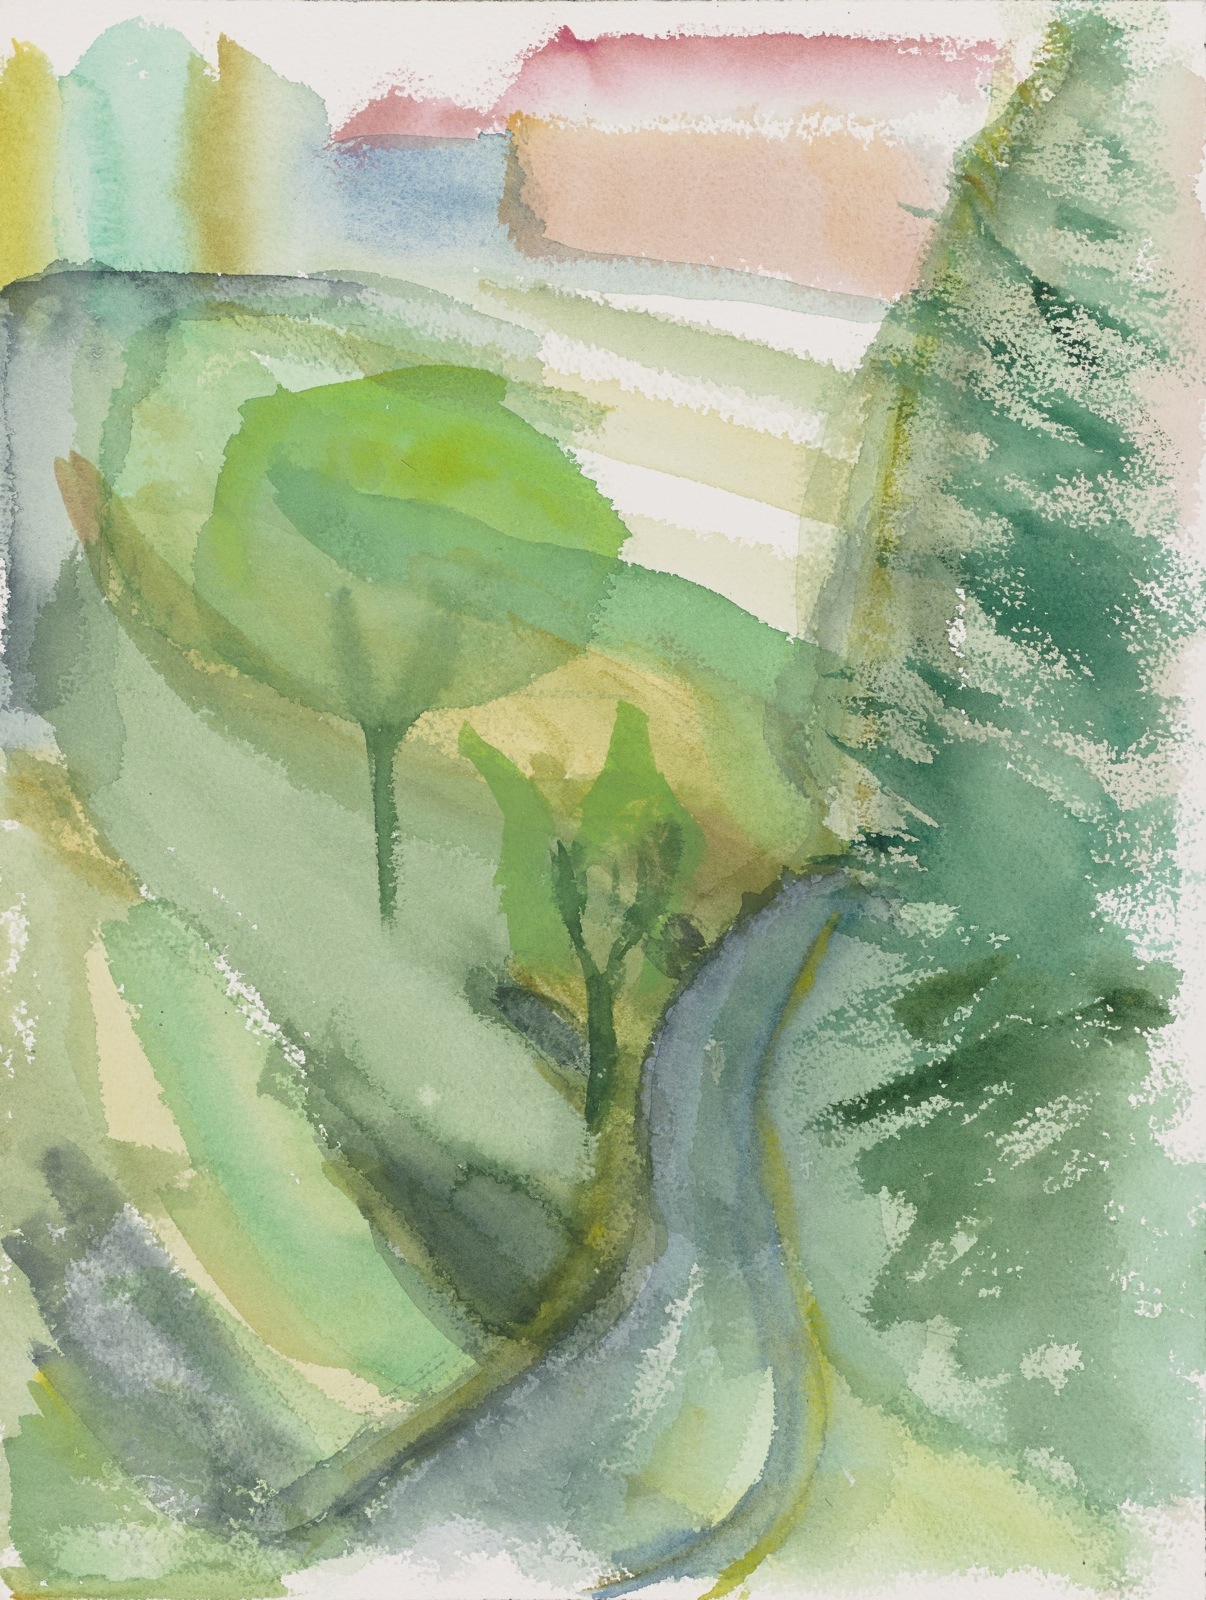 Drawing - Hill in Prague with path - Watercolor